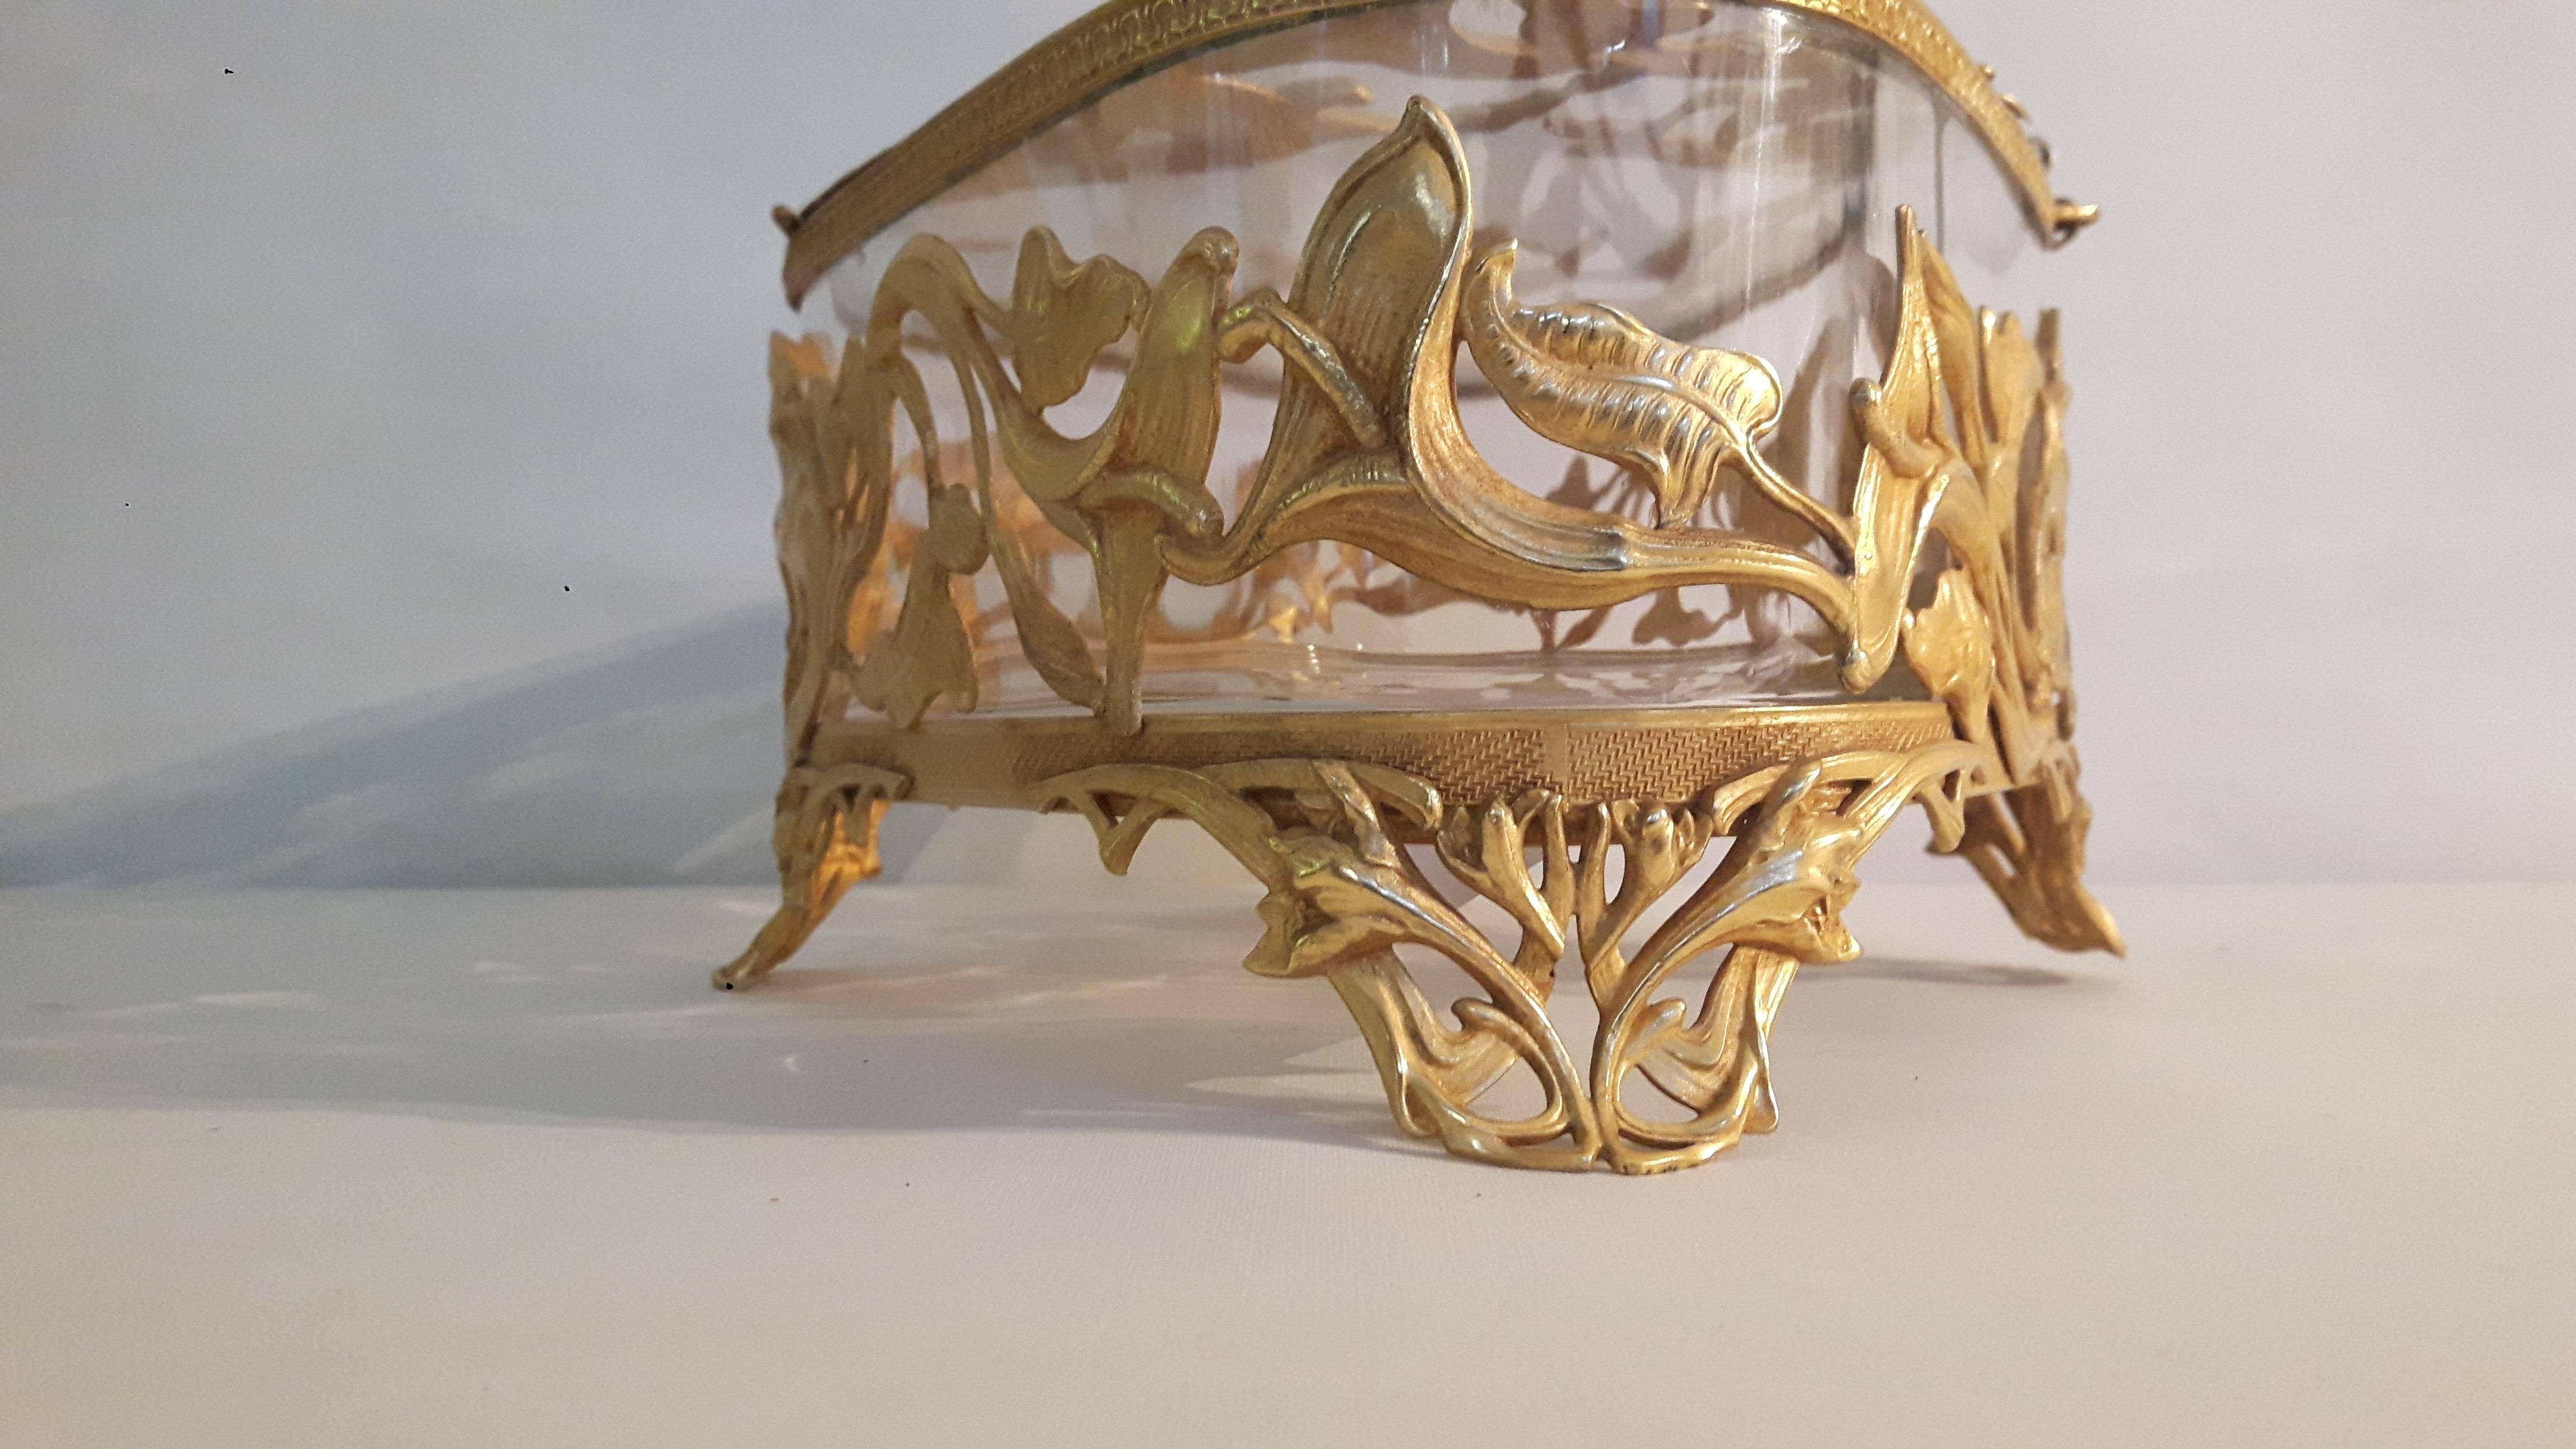 A crystal and gilt bronze art nouveau centrepiece, lozenge-shaped, probably by the Jouy or Saint Louis factory.
French, circa 1880-1890.